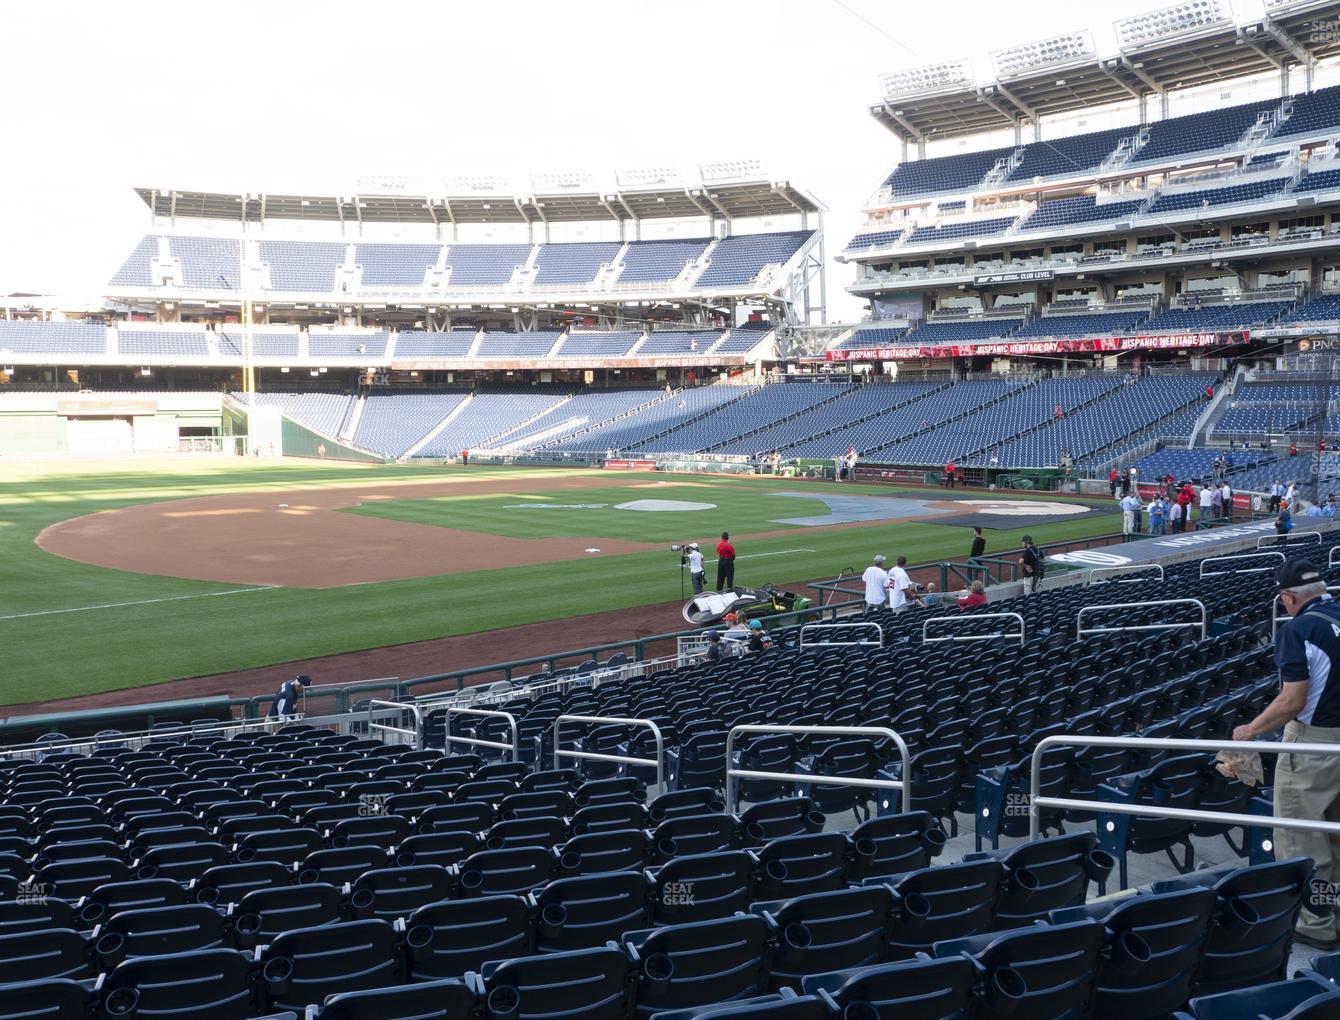 Nats Park Seating Chart With Rows